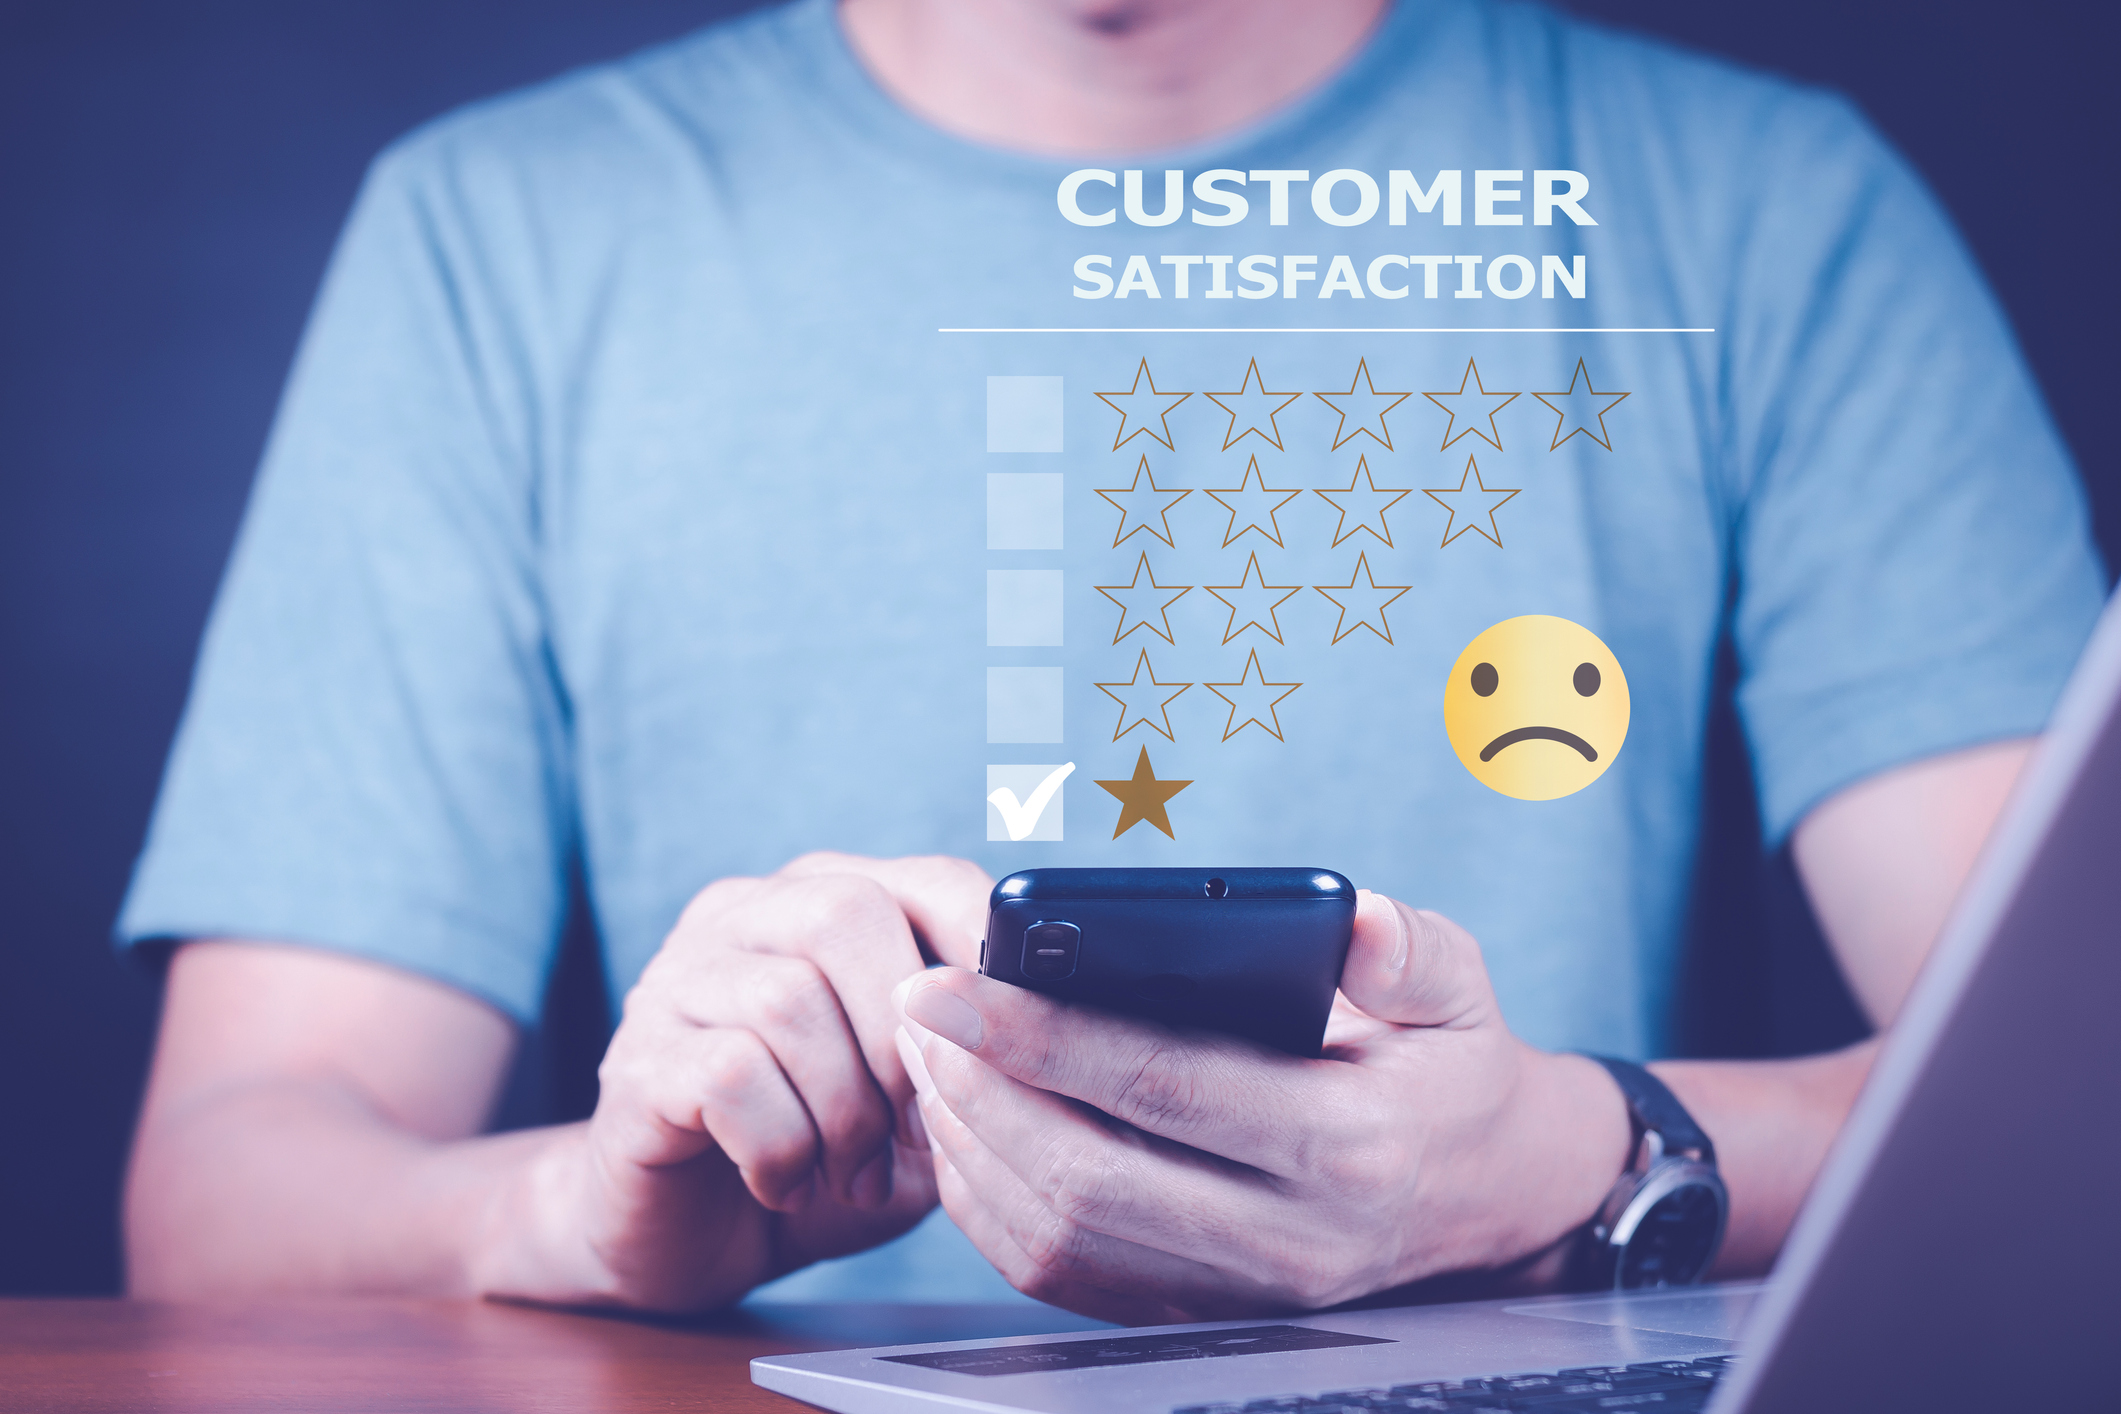 Customer Experience dissatisfied Concept, Unhappy Businessman Client with Sadness  Face on smartphone screen, Bad review, bad service dislike bad quality, low rating, social media not good.